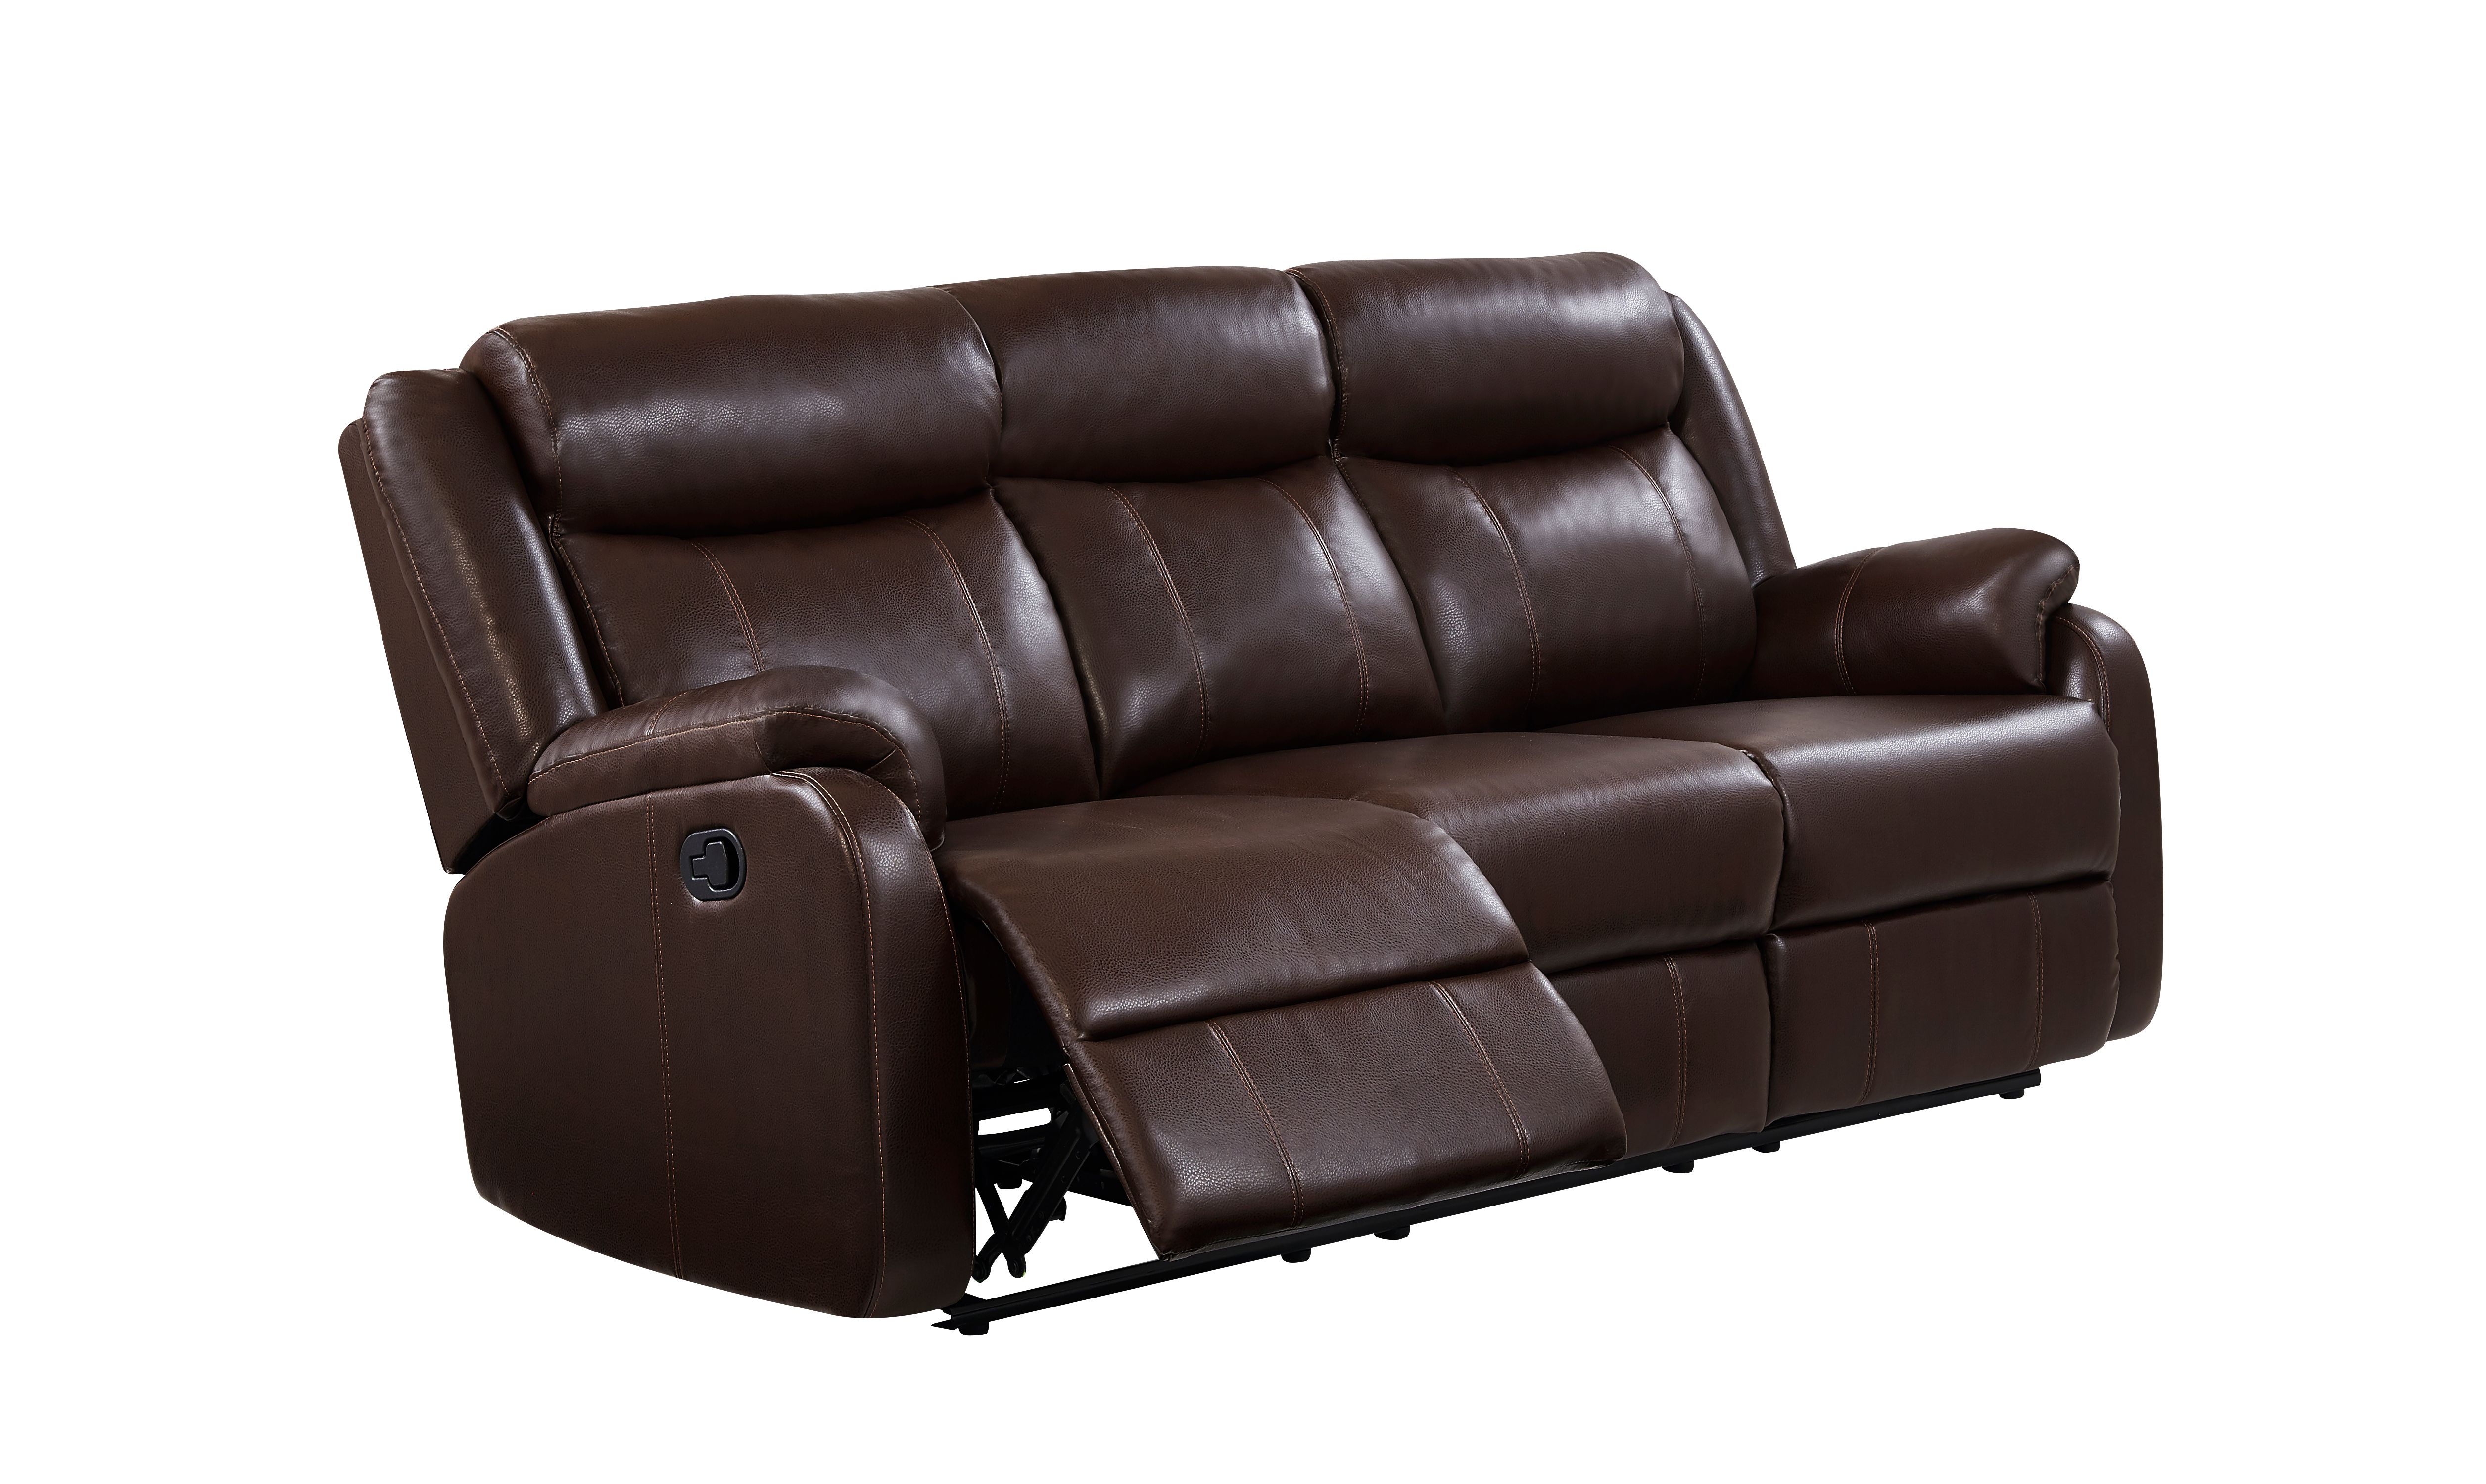 Drawer Reclining Sofa in Brown - image 2 of 10